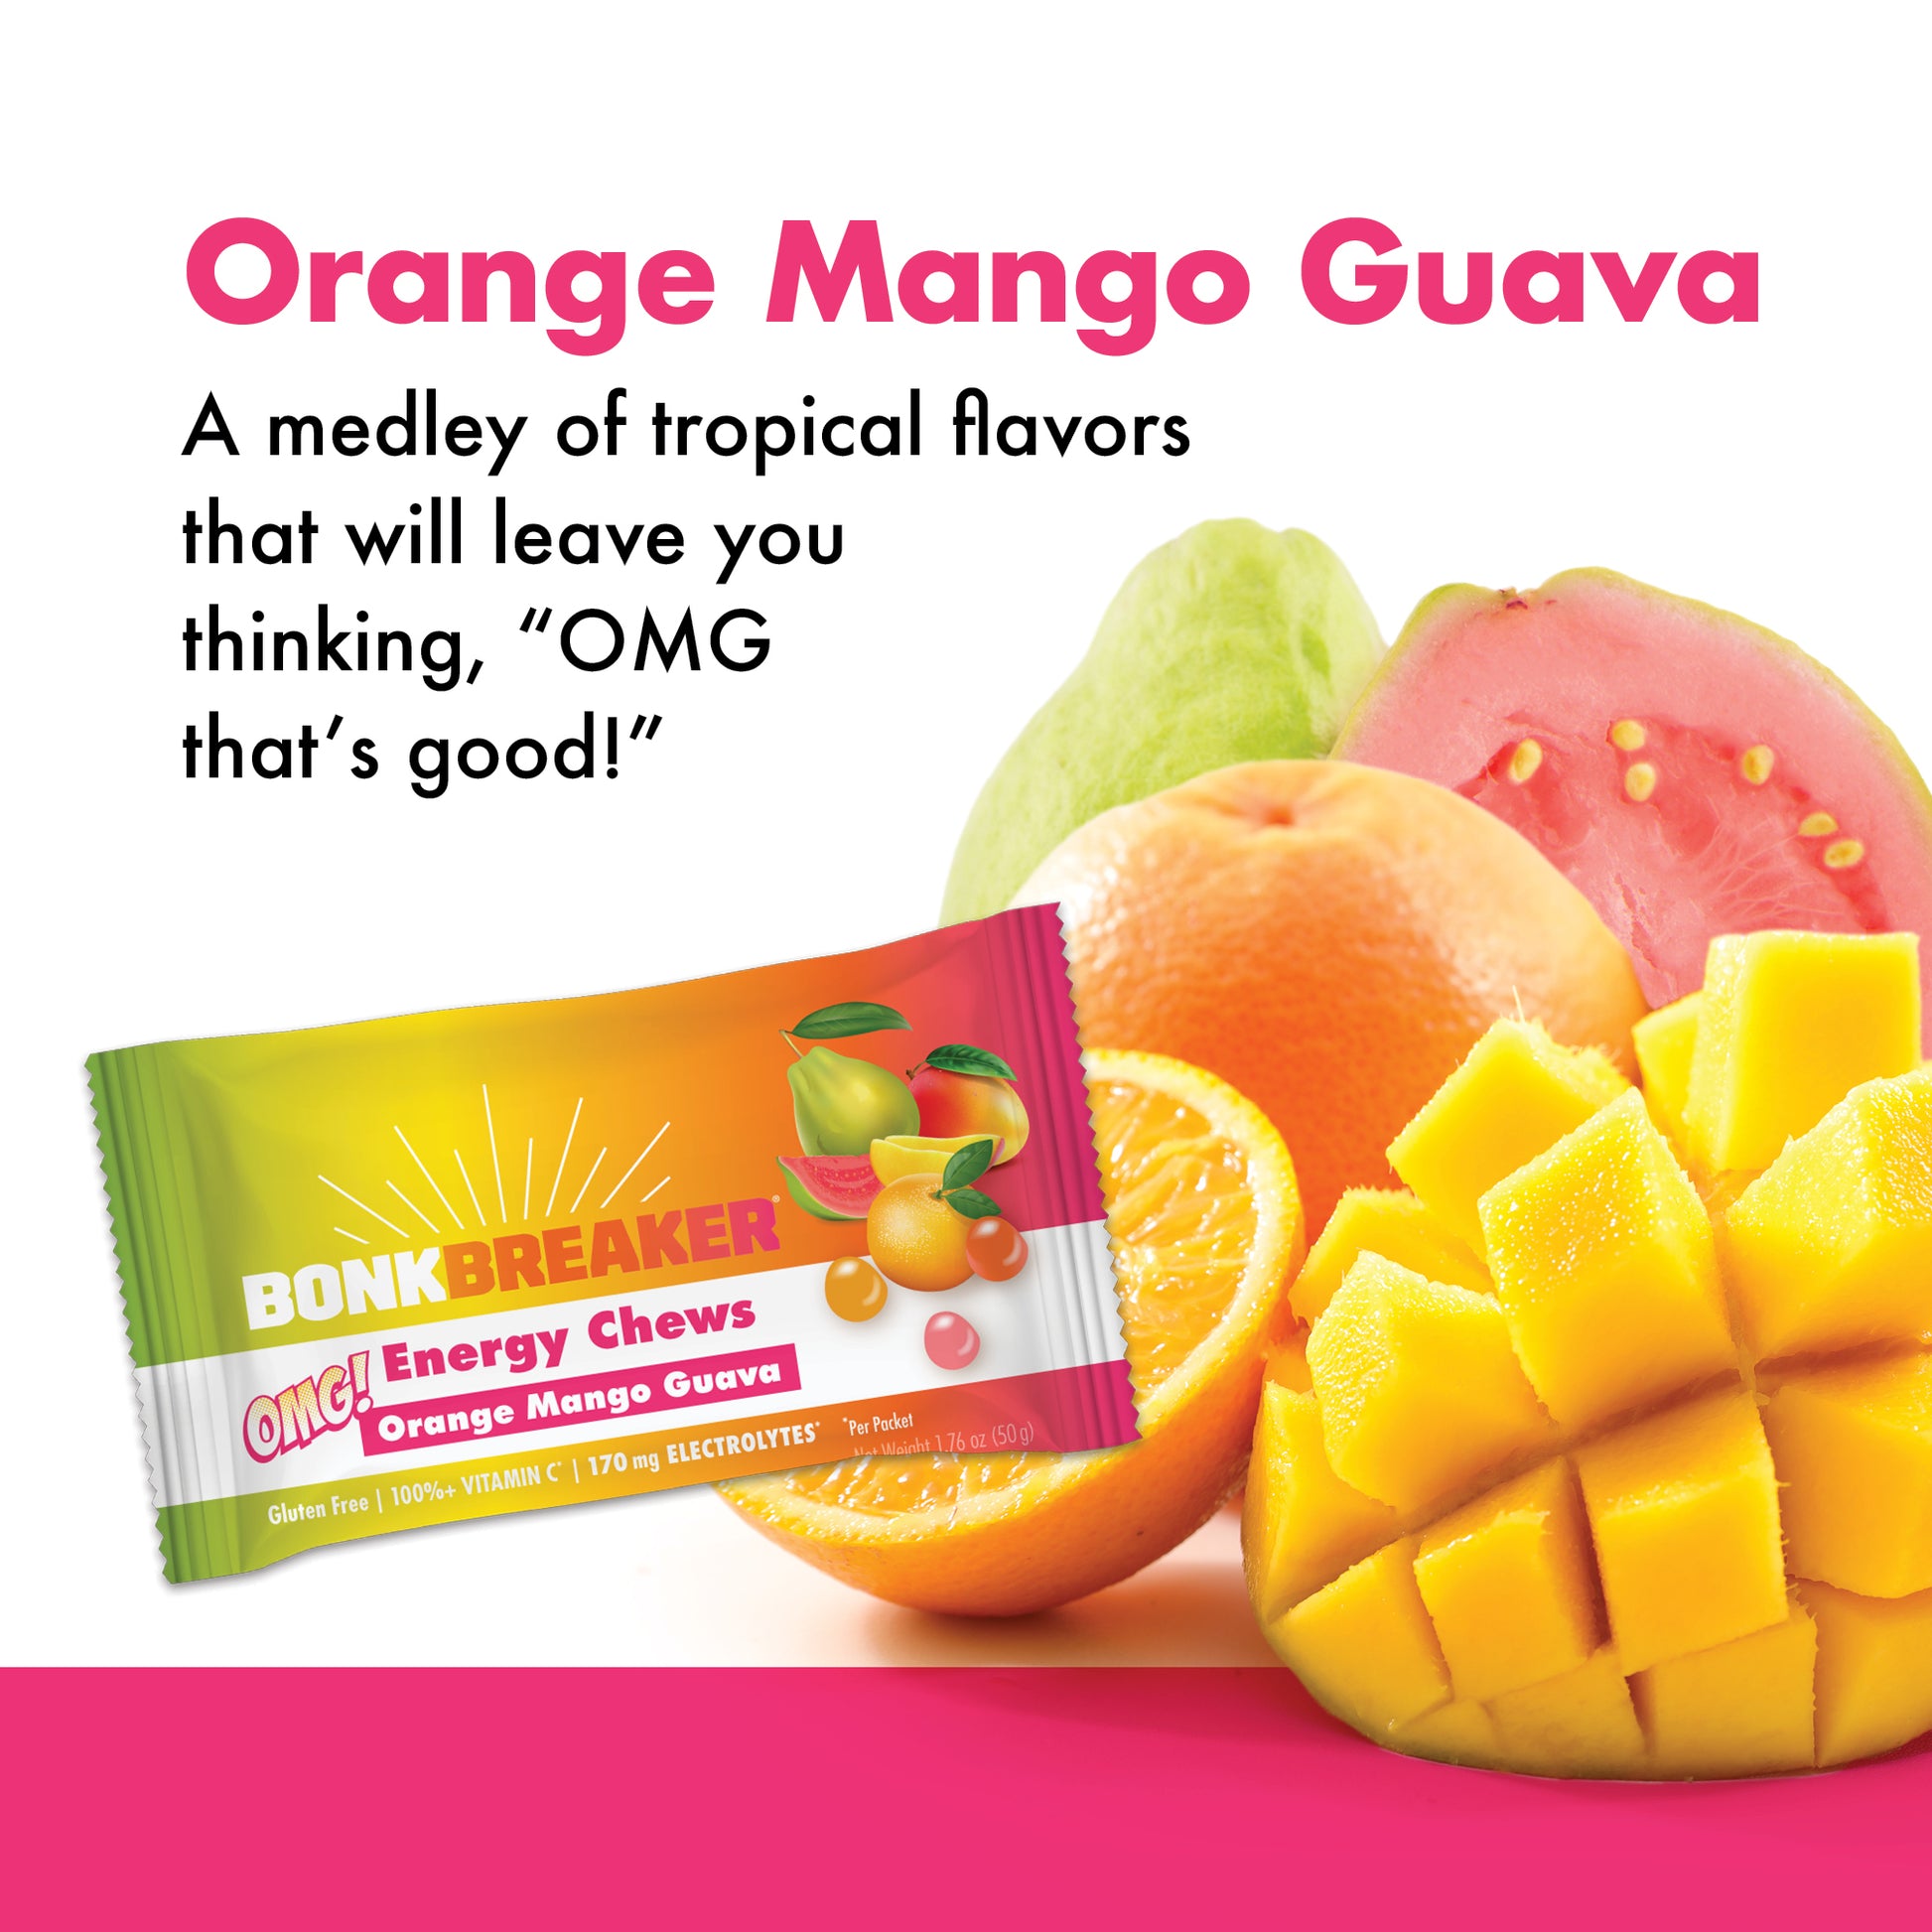 Orange Mango Guava - A medley of tropical flavors that will leave you thinking "OMG that's good!"